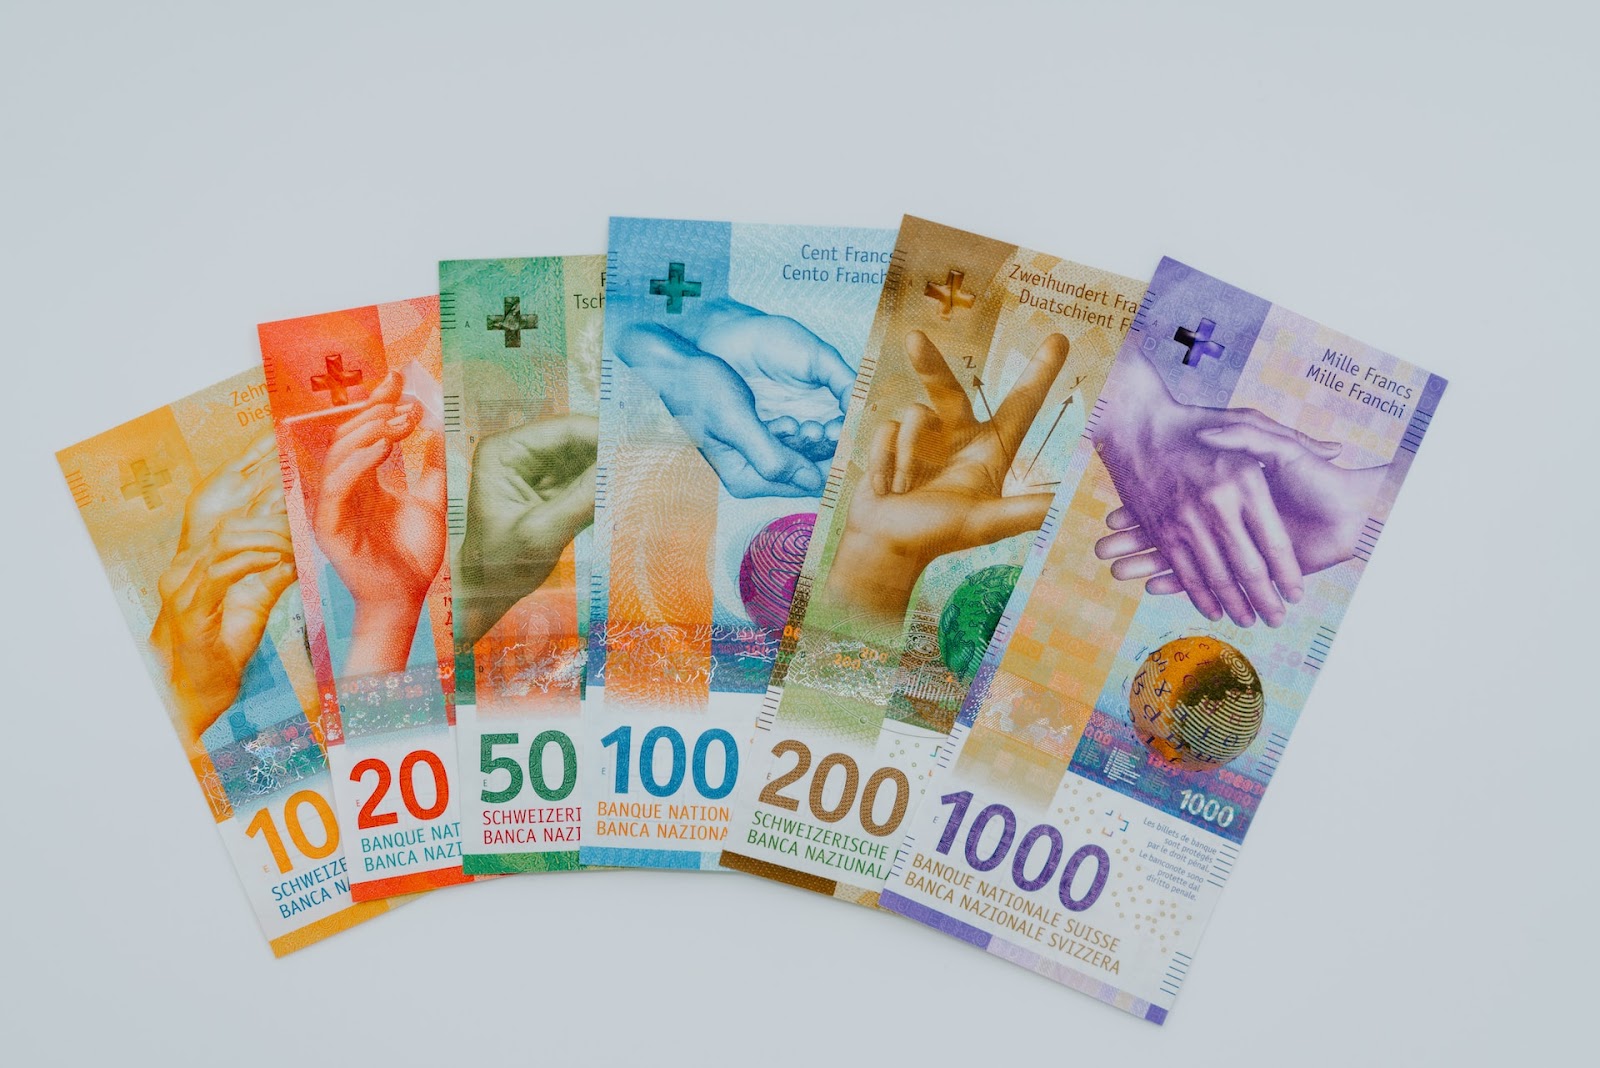 Swiss frank notes